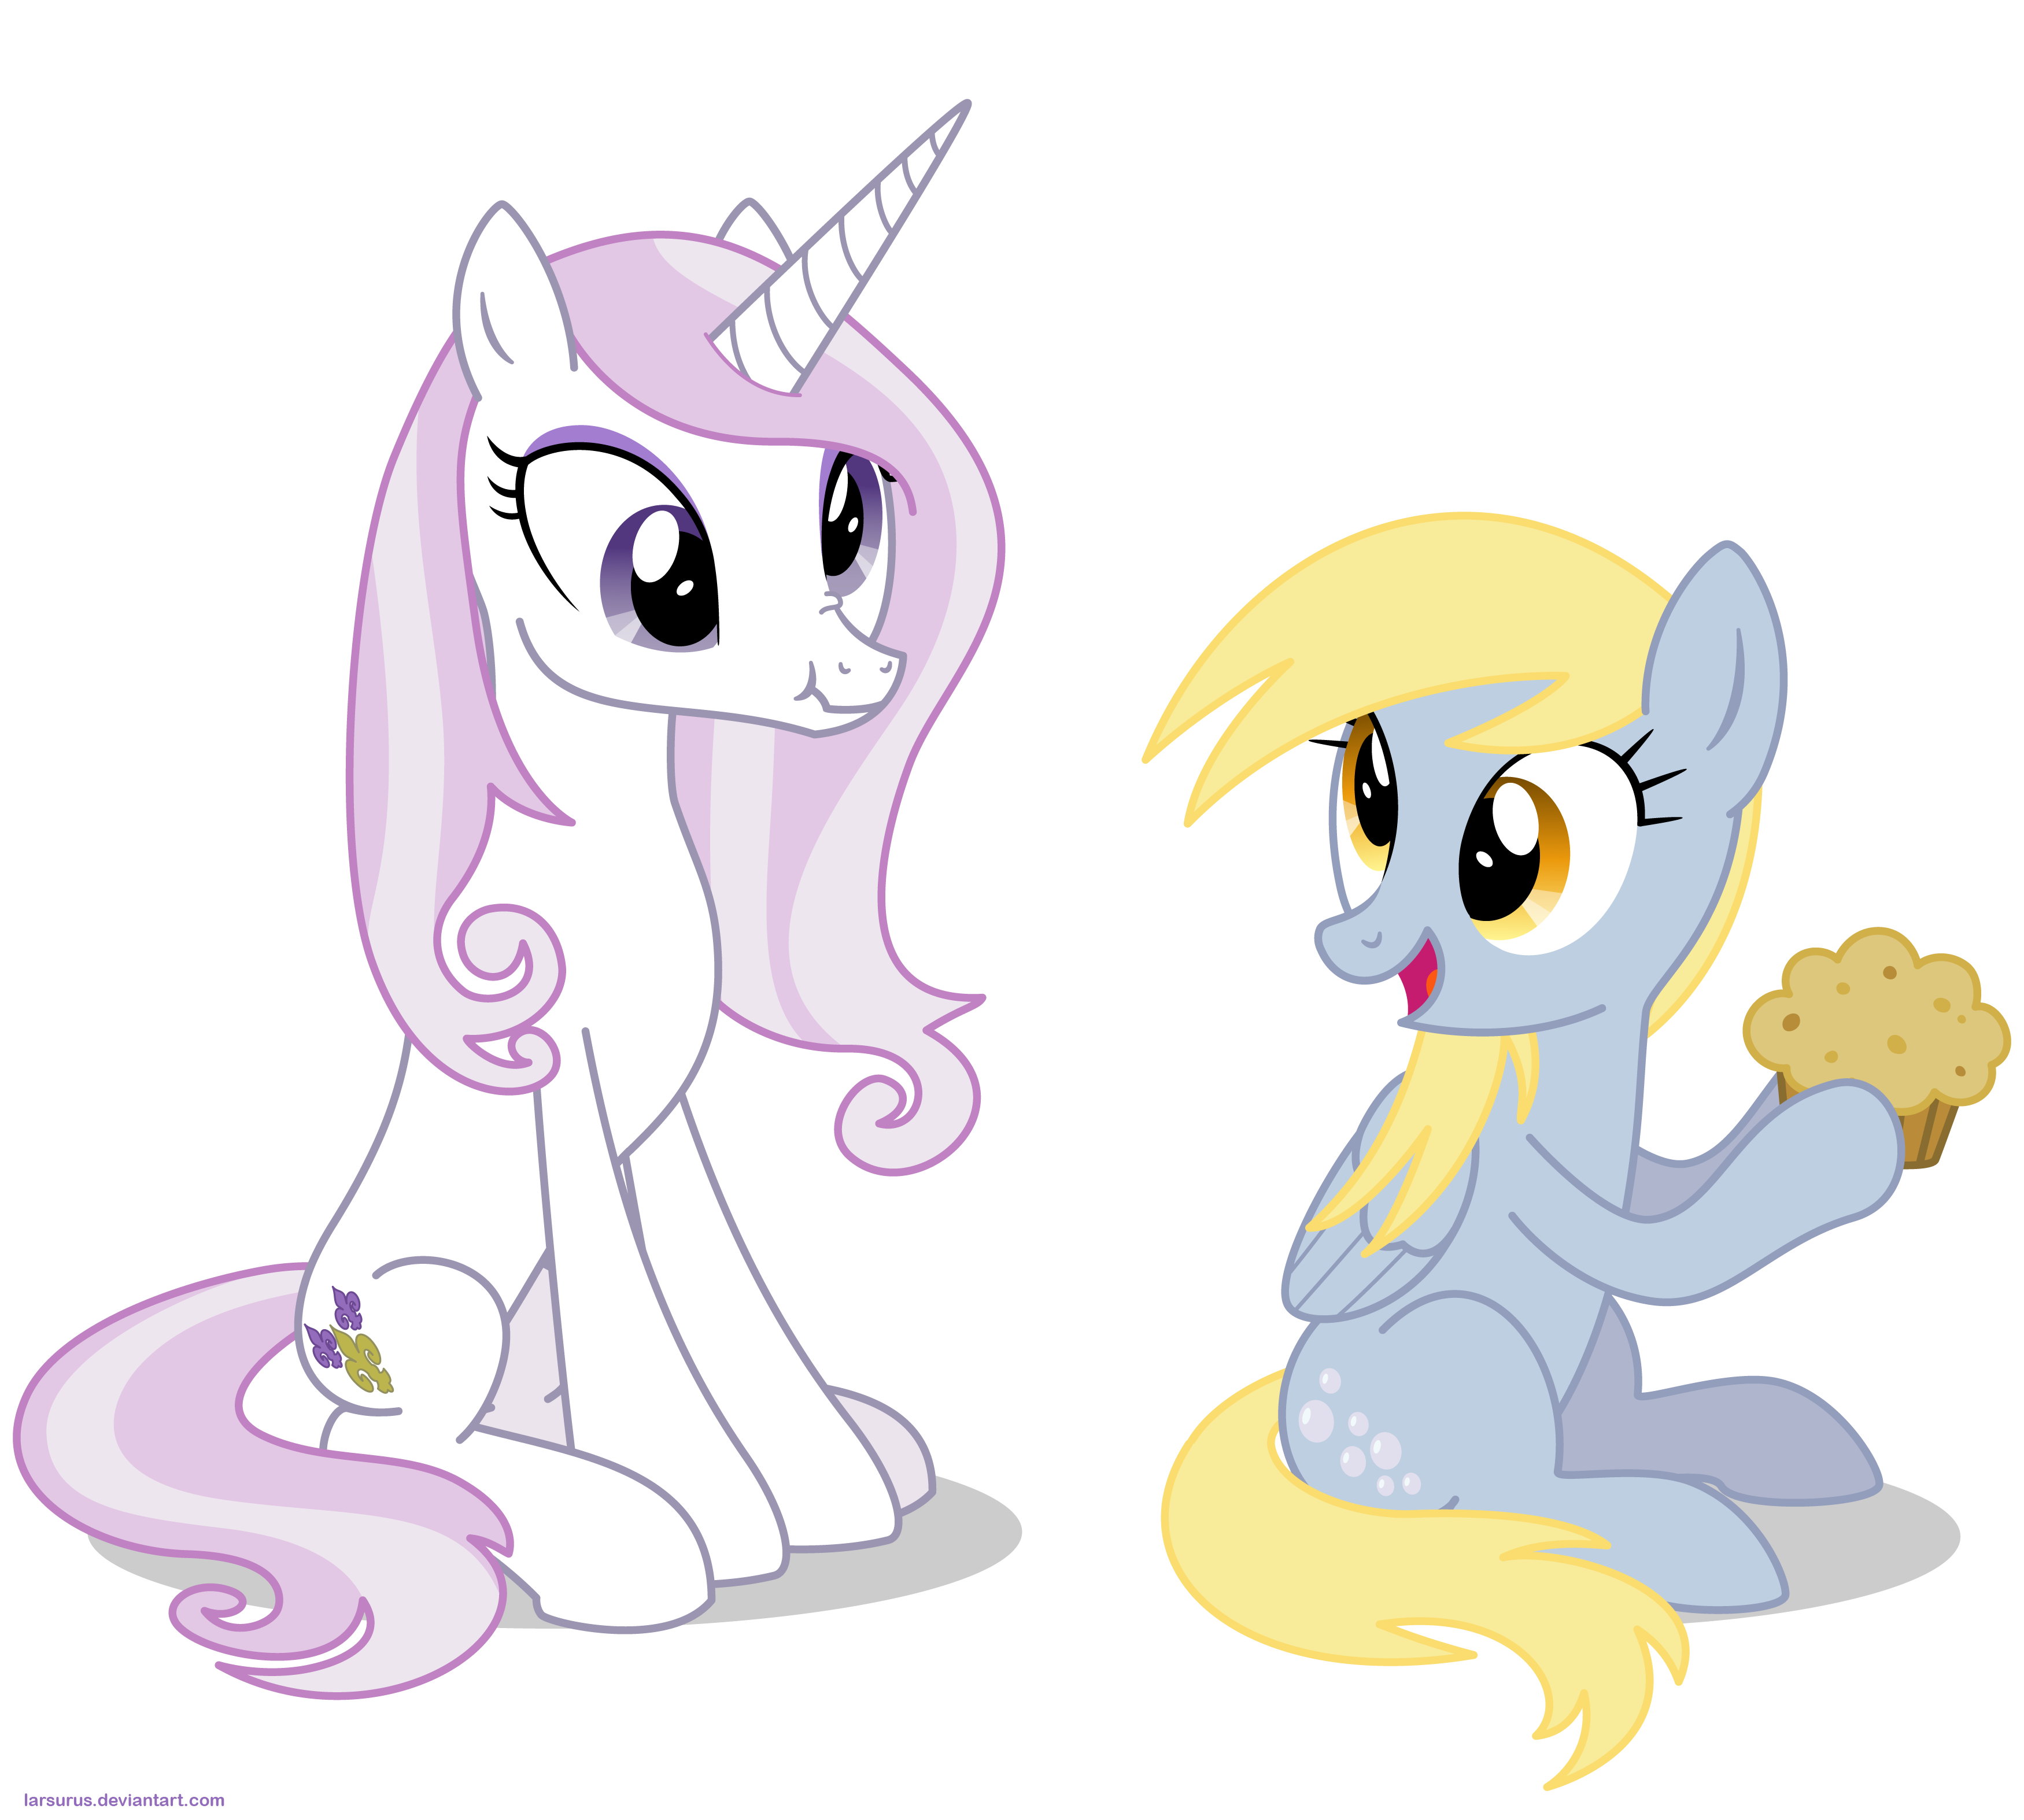 [Obrázek: fleur_the_posing_pony_and_derpy___png_by...4rxmhq.png]